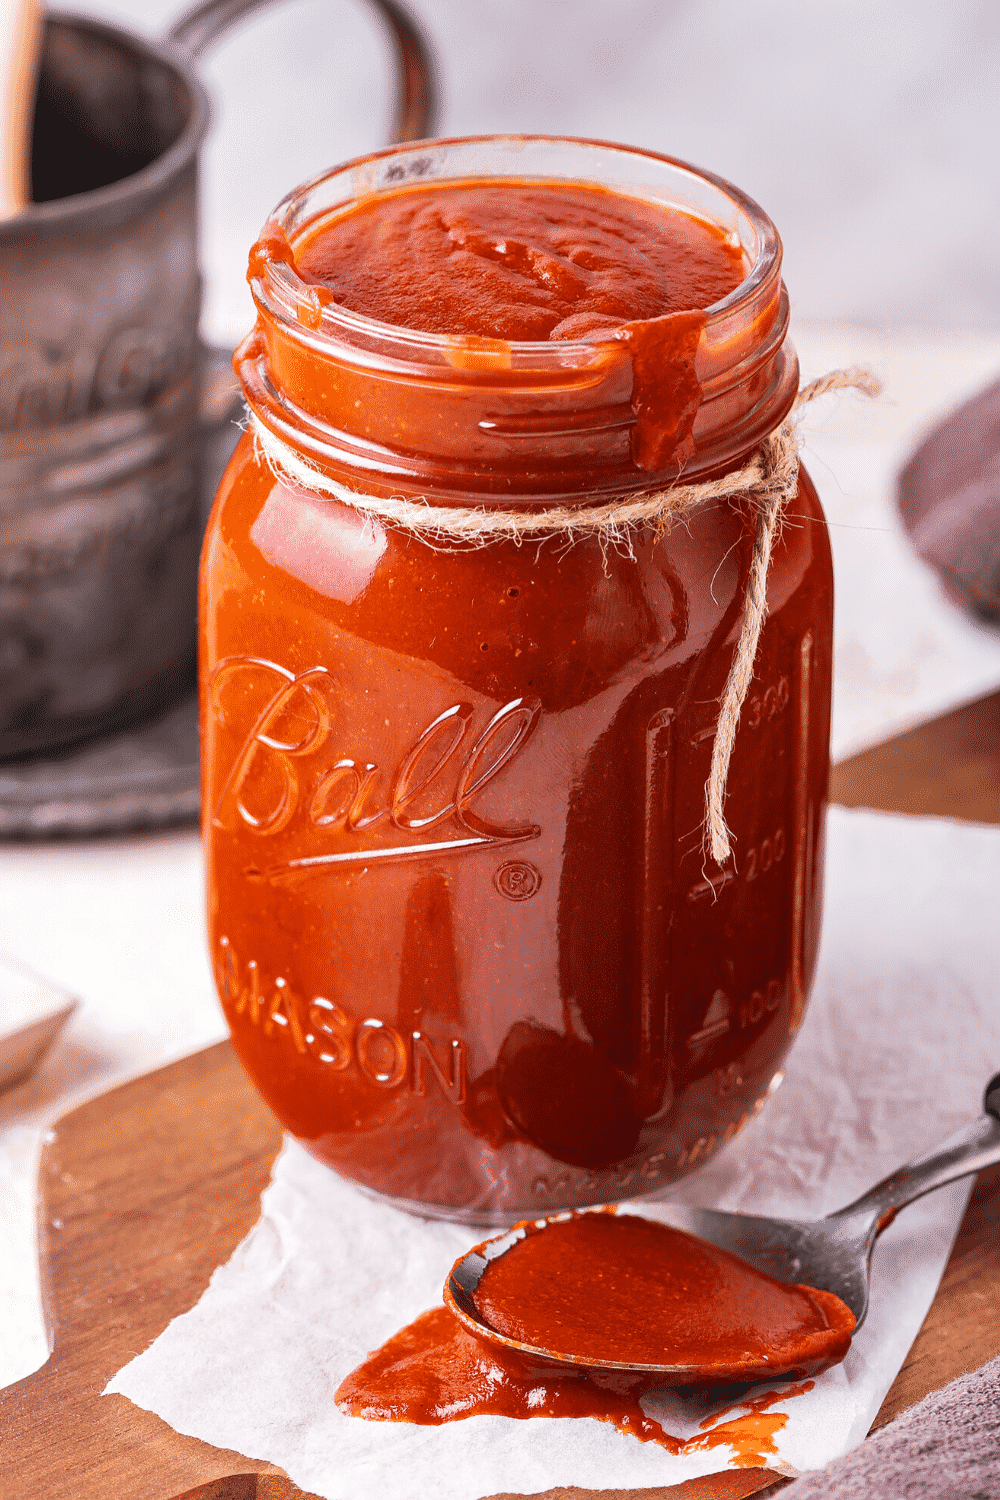 A glass jar filled to the top with barbecue sauce. The jars on a paper towel and there is a spoons filled with barbecue sauce in front of the jar on the paper towel.